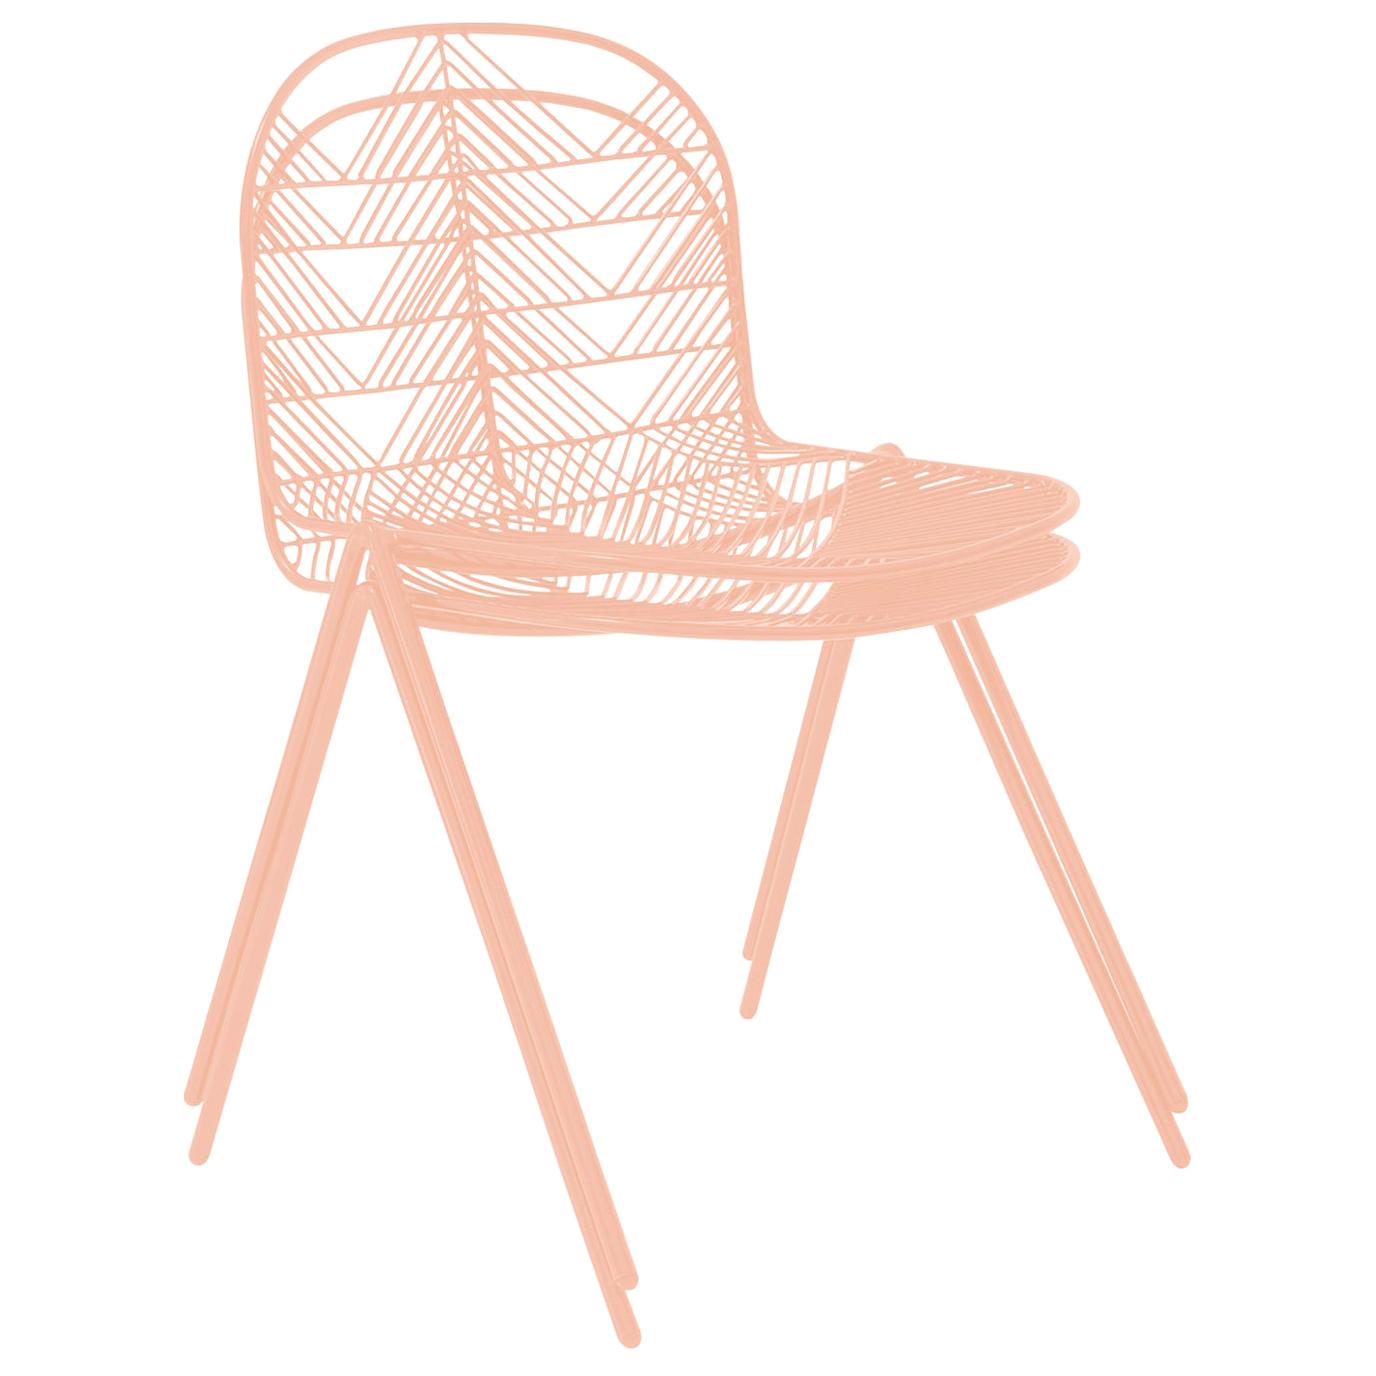 Bend Goods Wire Furniture
Stackable wire chair that's perfect for any occasion. The Betty side chair plays up a soft yet strong aesthetic with a gently curved shape and a contemporary edge perfect for modern interior or outdoor settings. Up to four